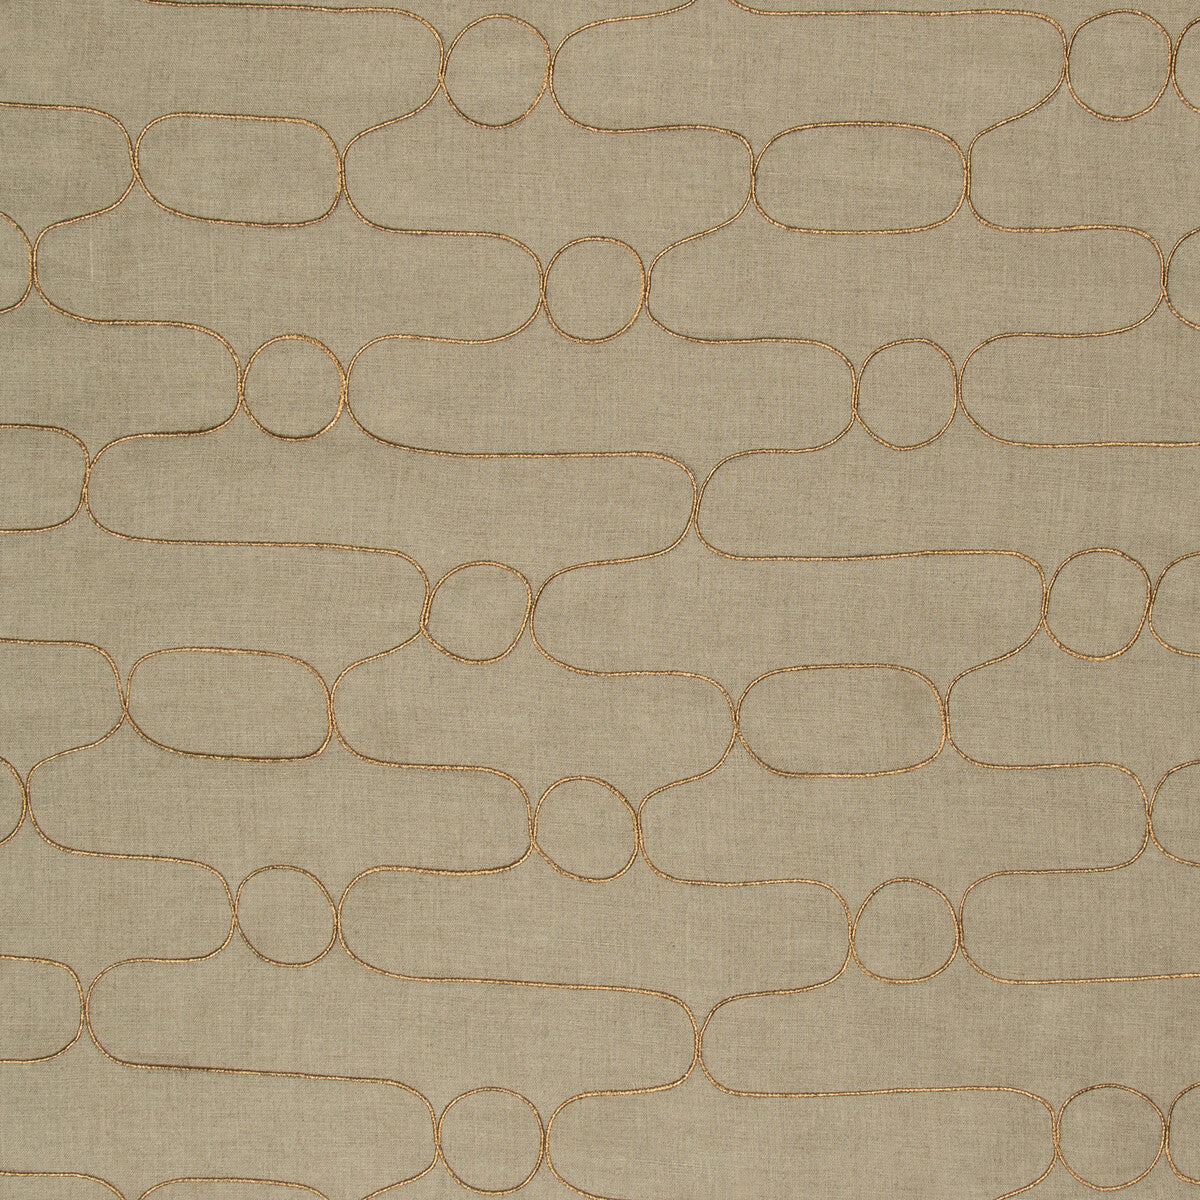 Tottori fabric in gilded color - pattern 4617.16.0 - by Kravet Couture in the Izu Collection collection